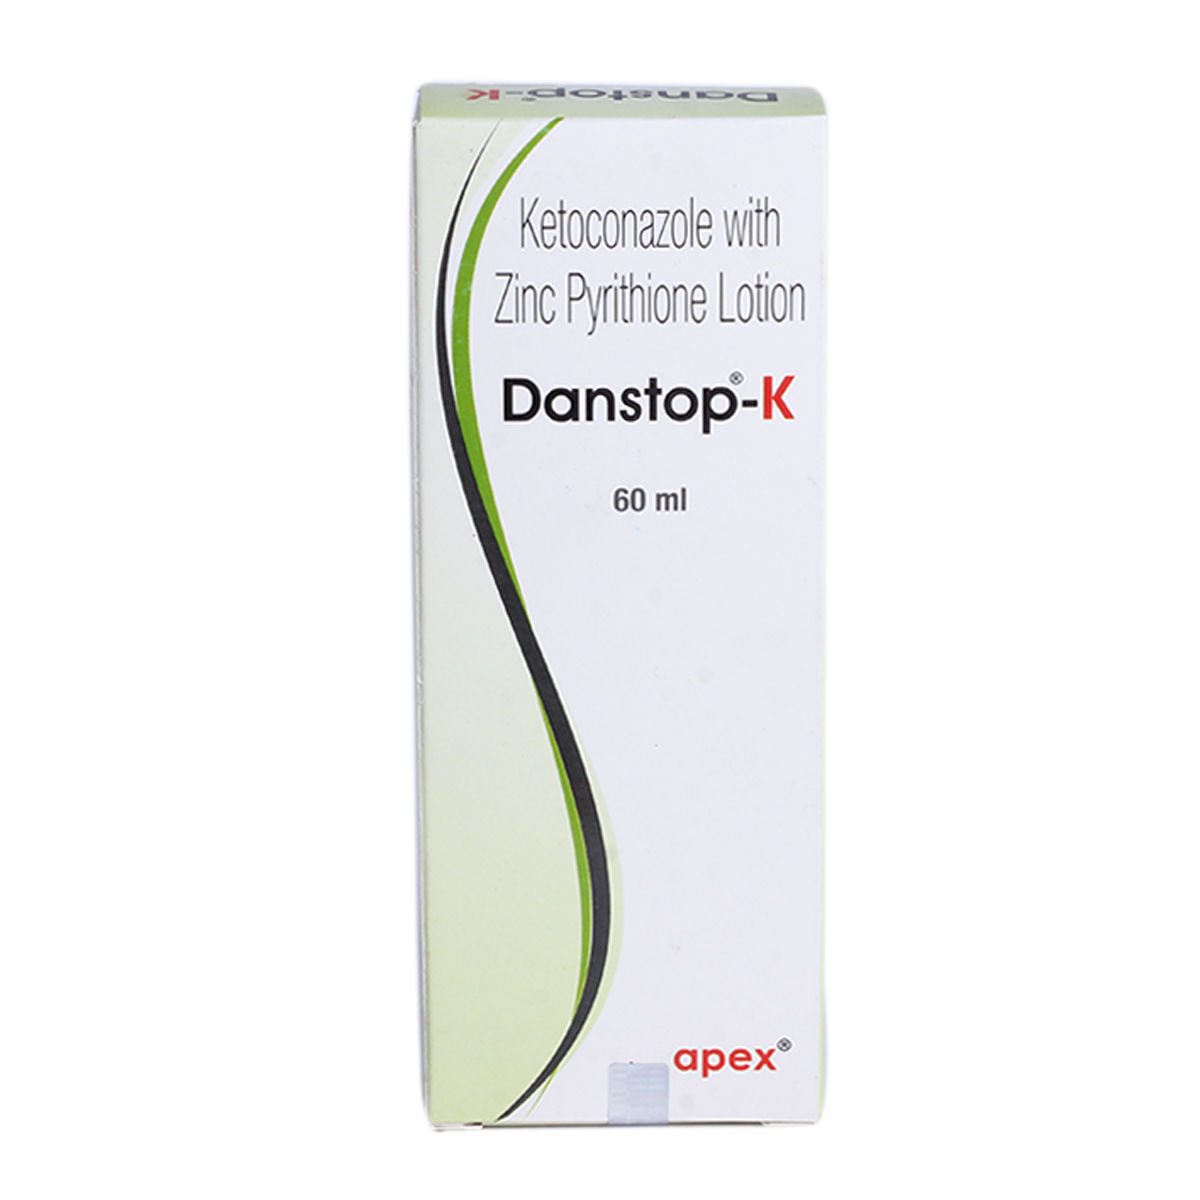 Danstop K Lotion 60 ml Price, Uses, Side Effects, Composition ...